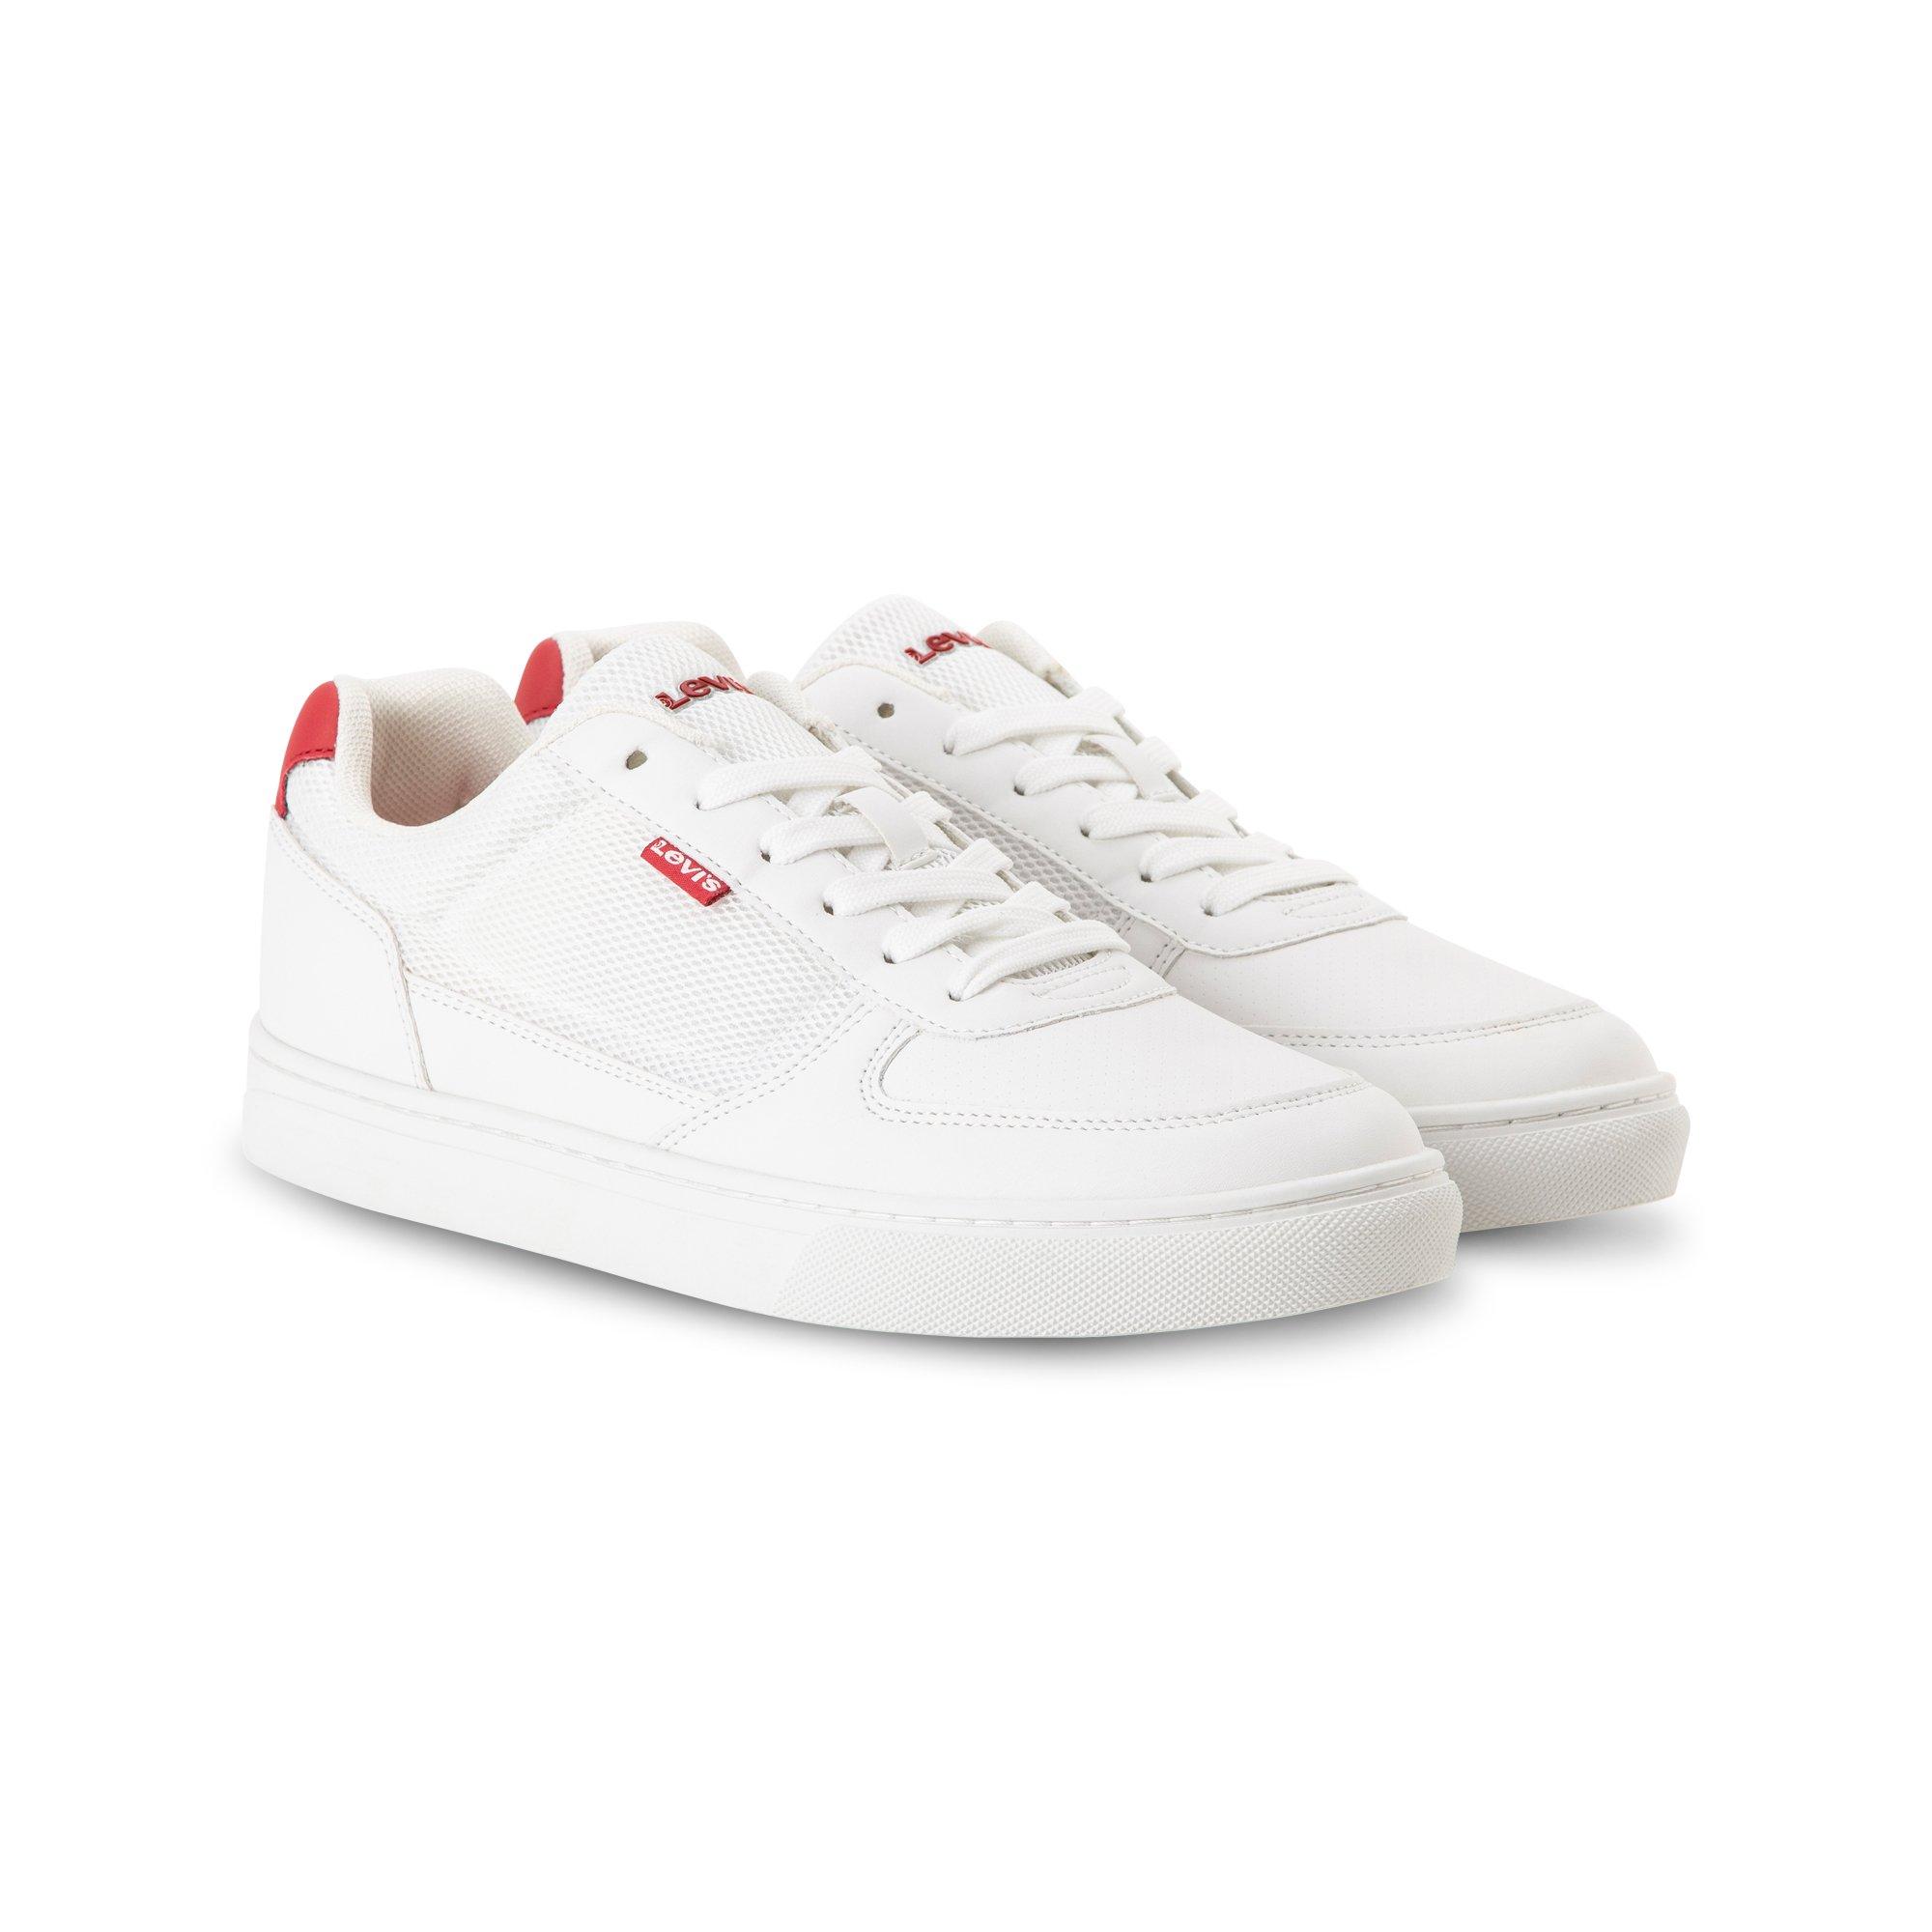 Levi's® LIAM Sneakers basse 